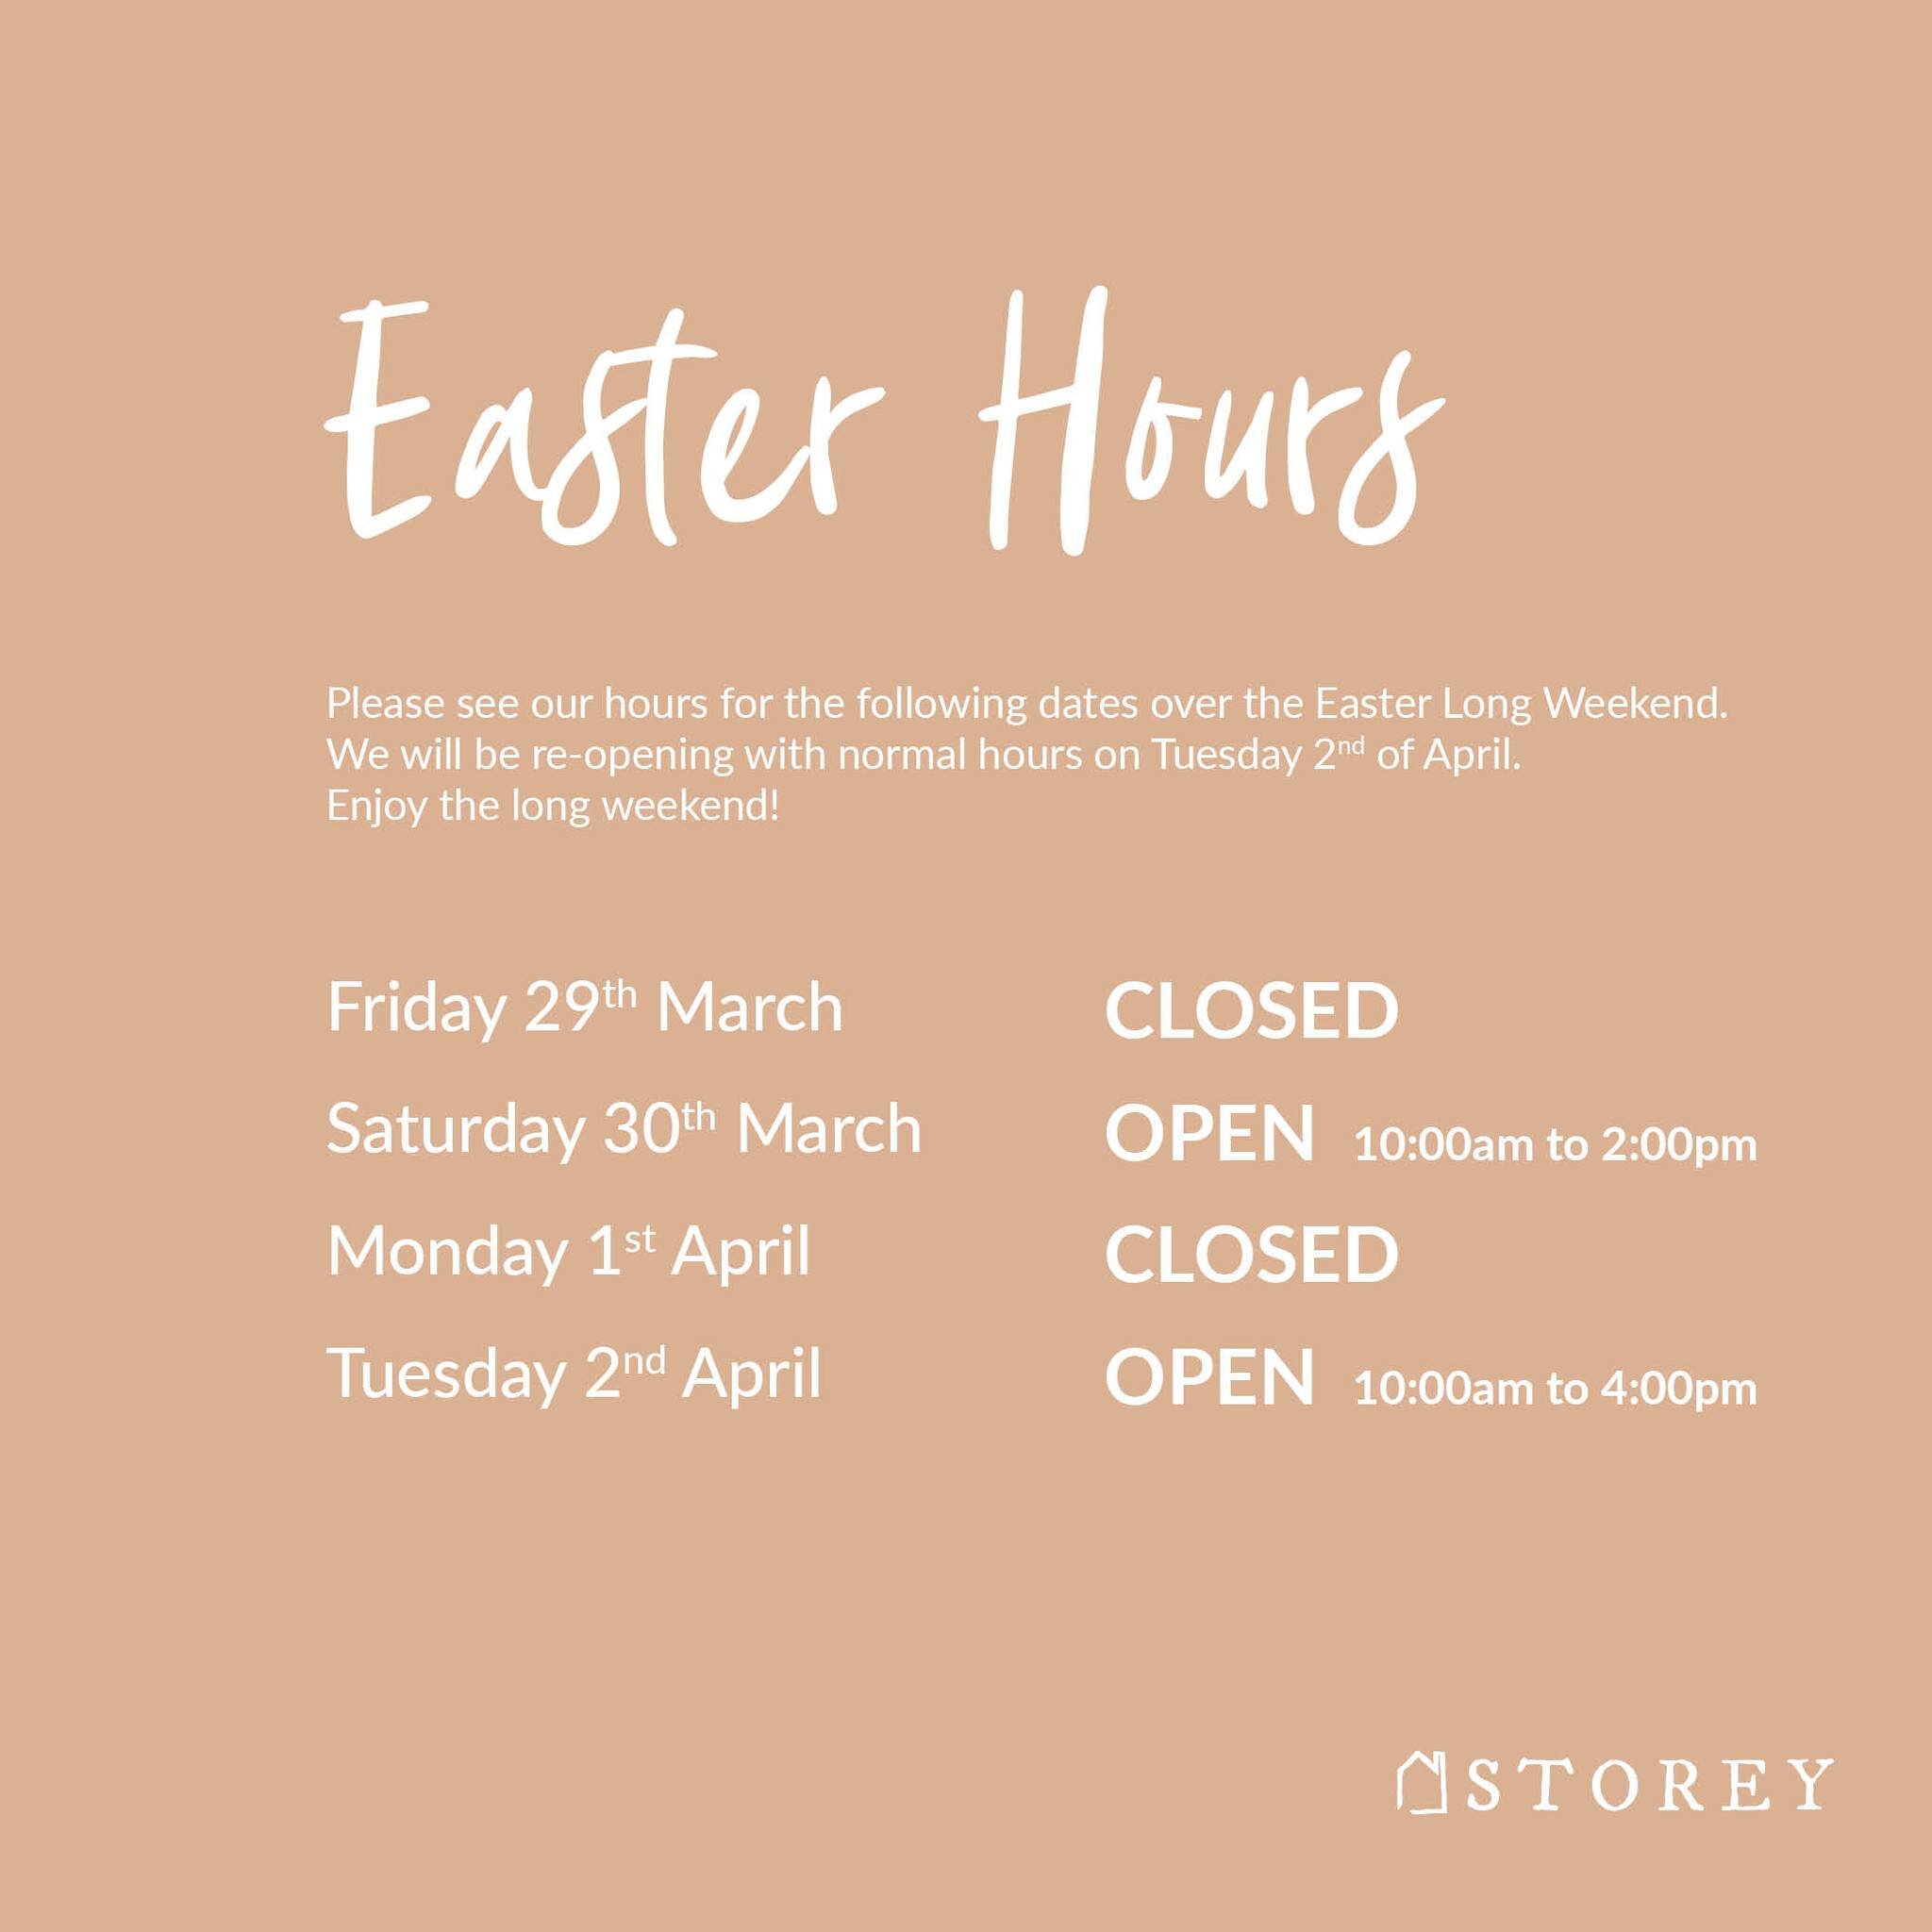 Yes we are open on Saturday! 

We will be closed for Good Friday and Easter Monday, but we will be open on Saturday and would love to see you all.

We hope enjoy this time with family and friends!